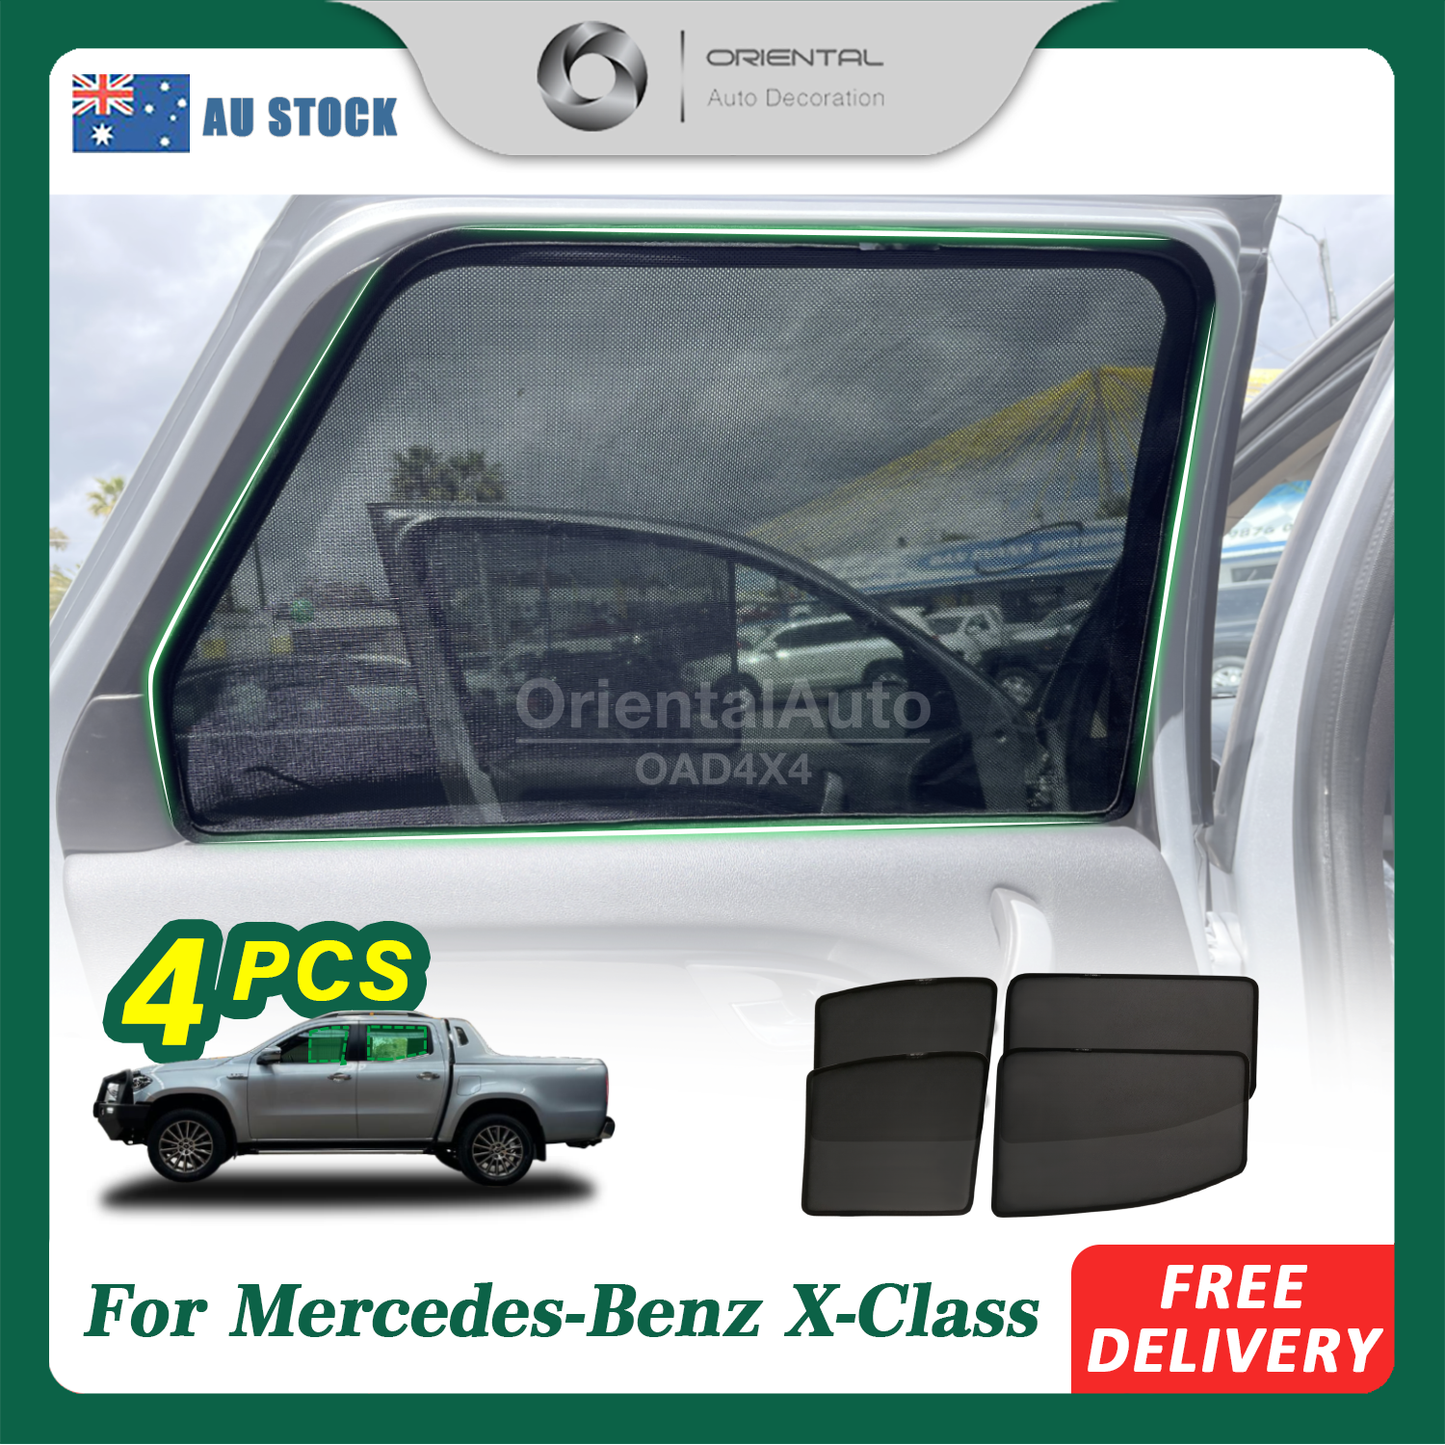 4PCS Magnetic Sun Shade for Mercedes-Benz X-class 2017+ Window Sun Shades UV Protection Mesh Cover